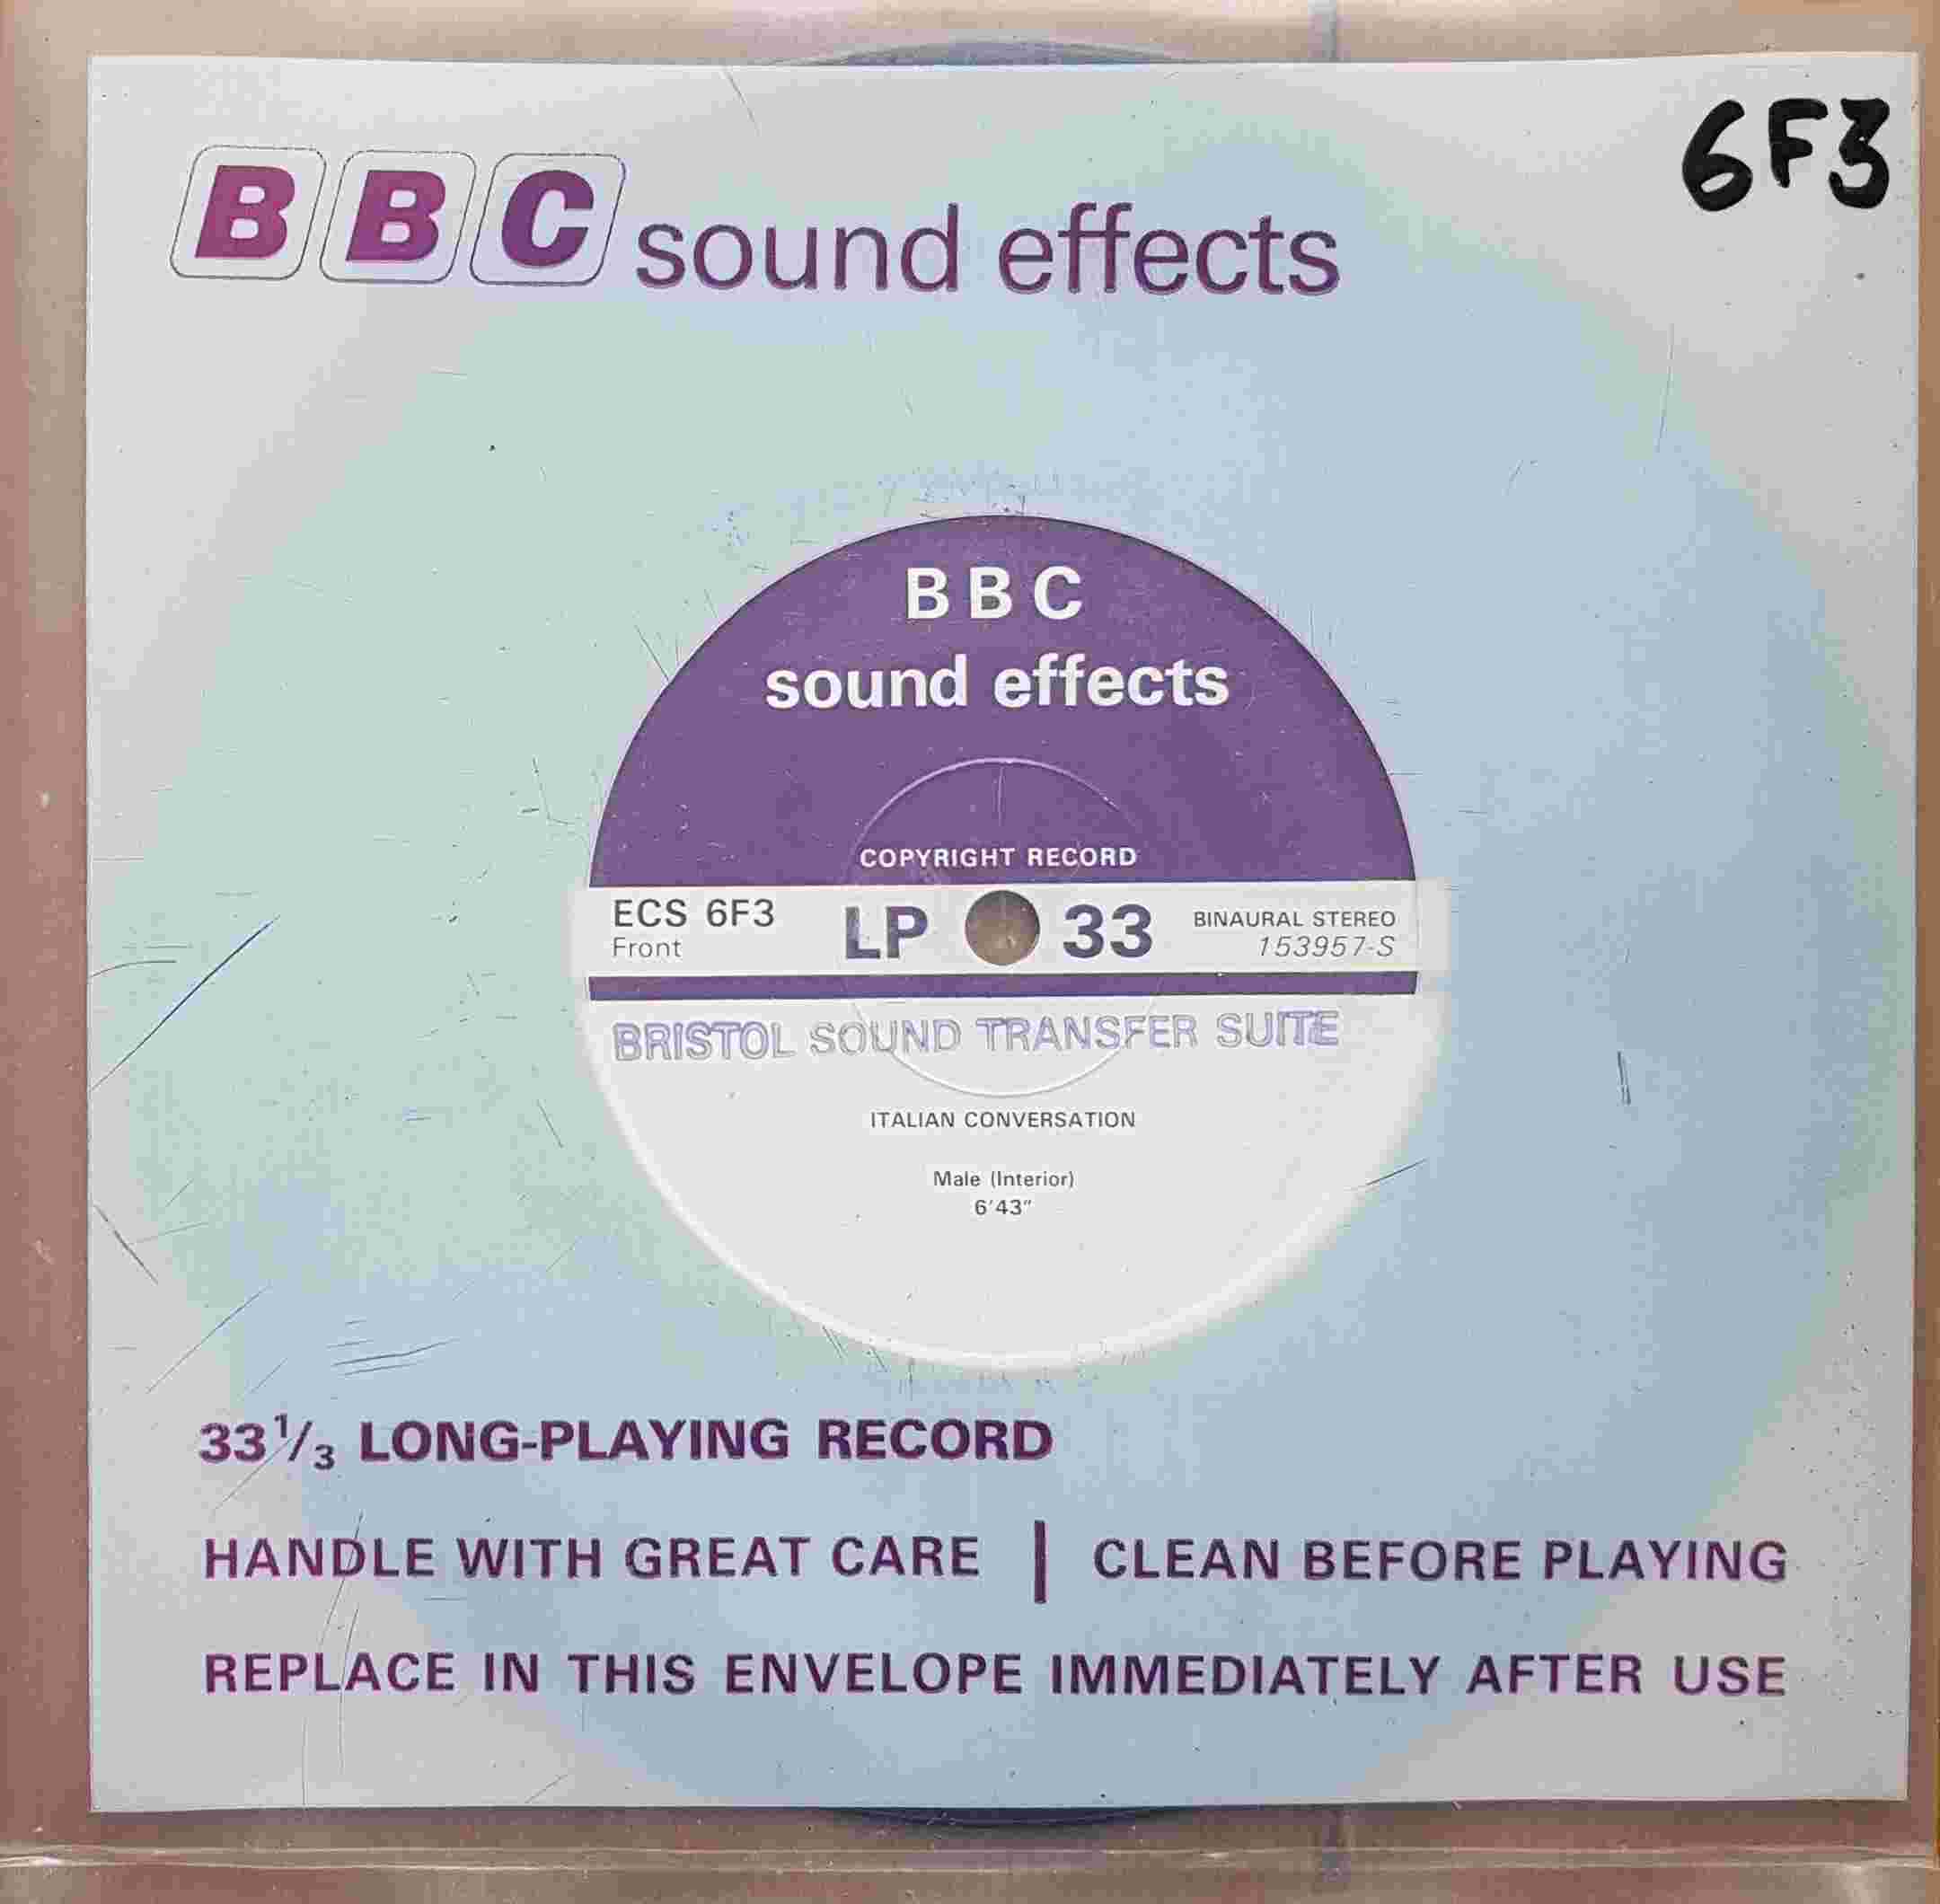 Picture of ECS 6F3 Italian conversation by artist Not registered from the BBC singles - Records and Tapes library